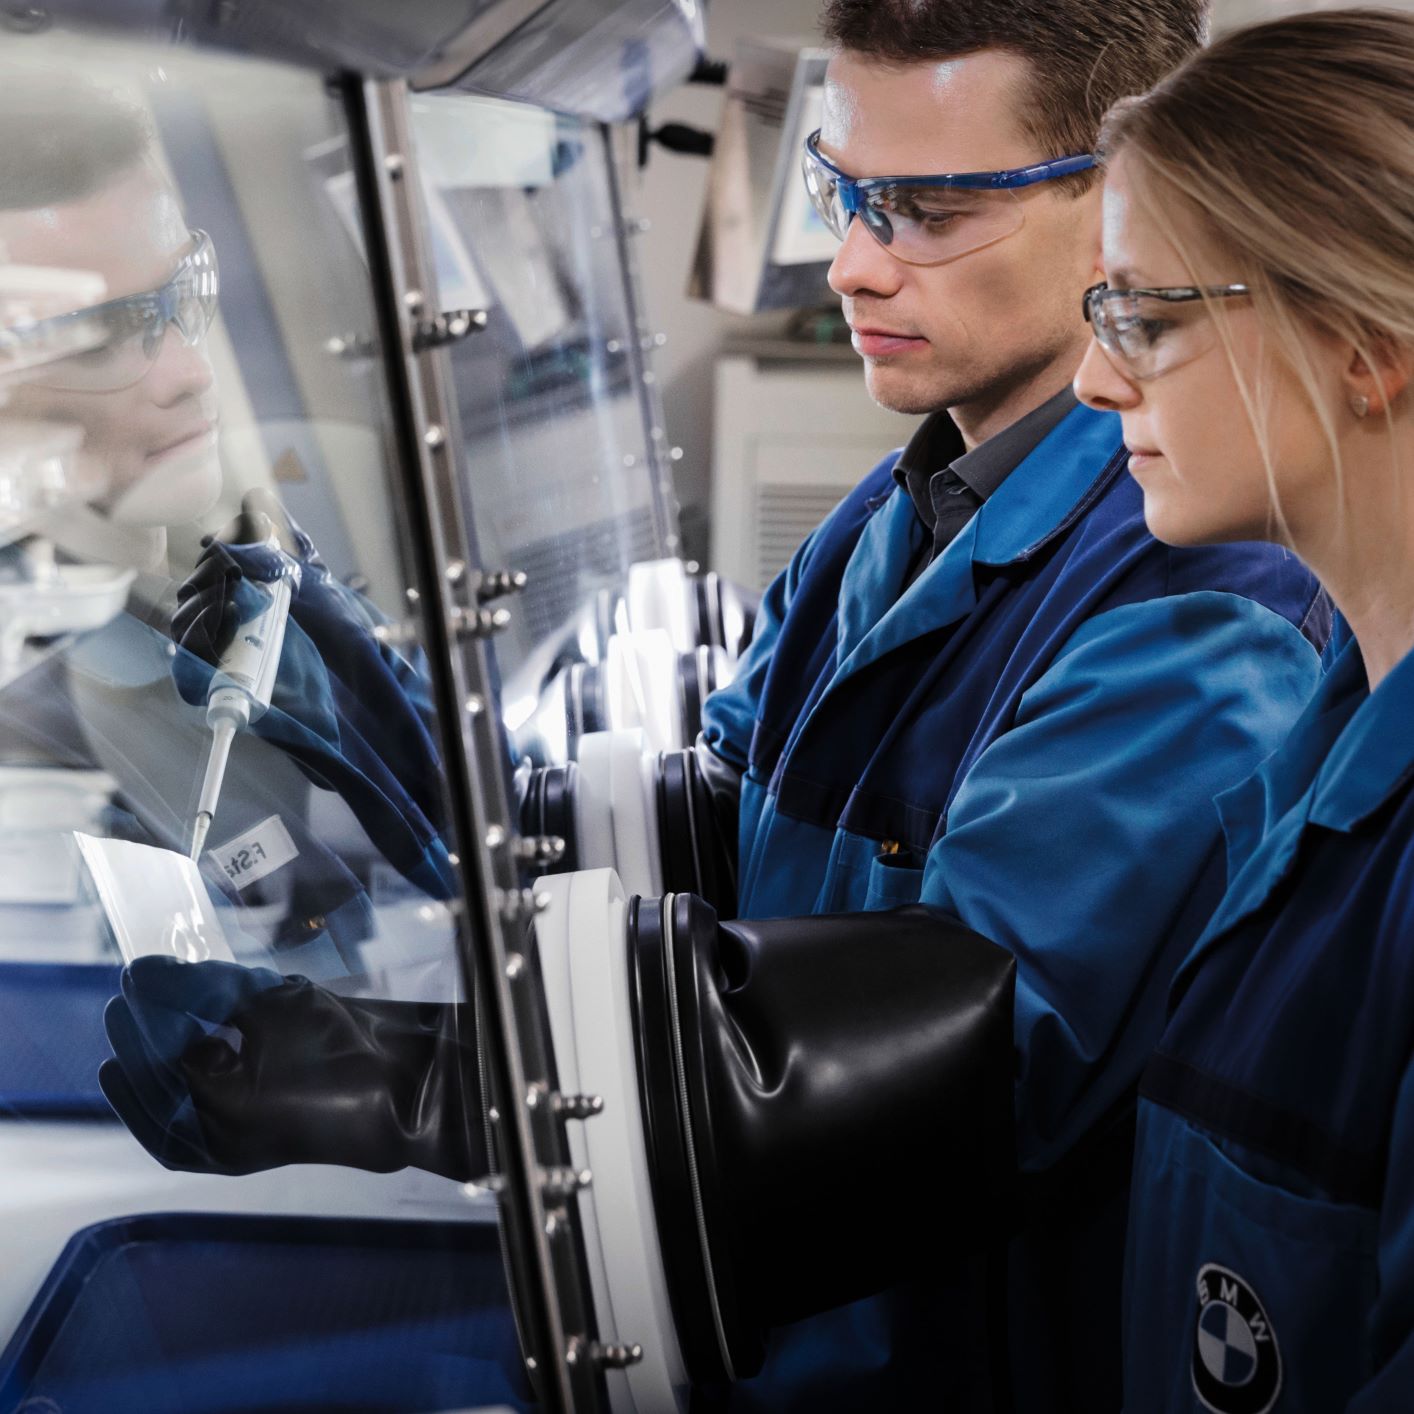 The image shows two BMW Group employees working in a lab.